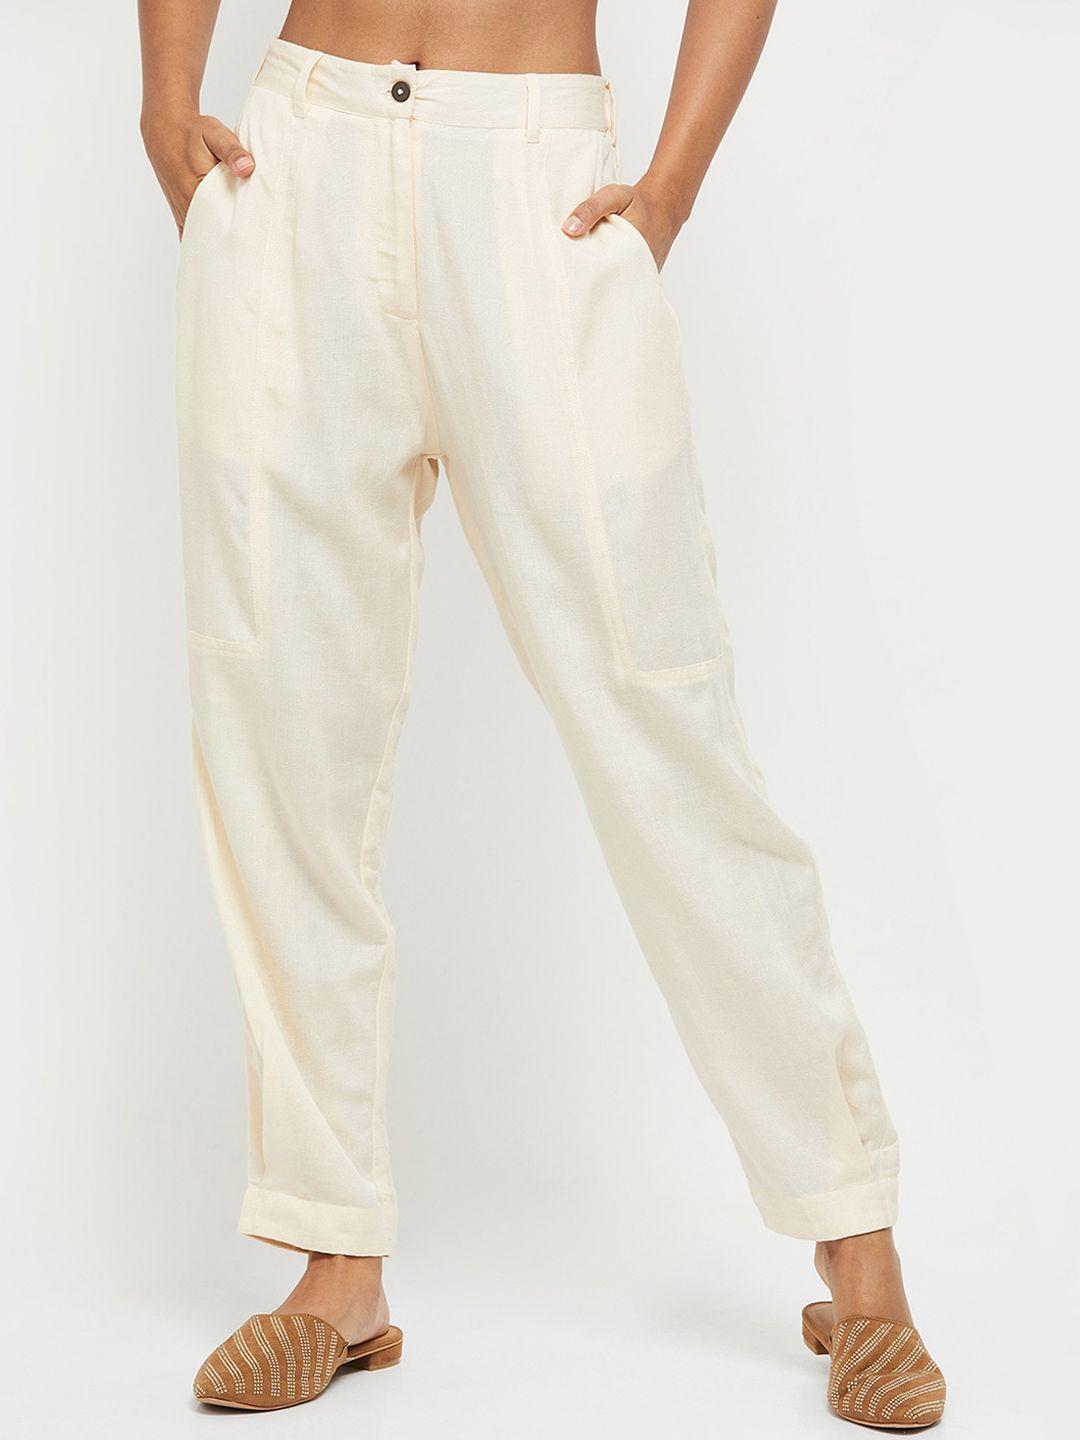 max-women-off-white-solid-trousers